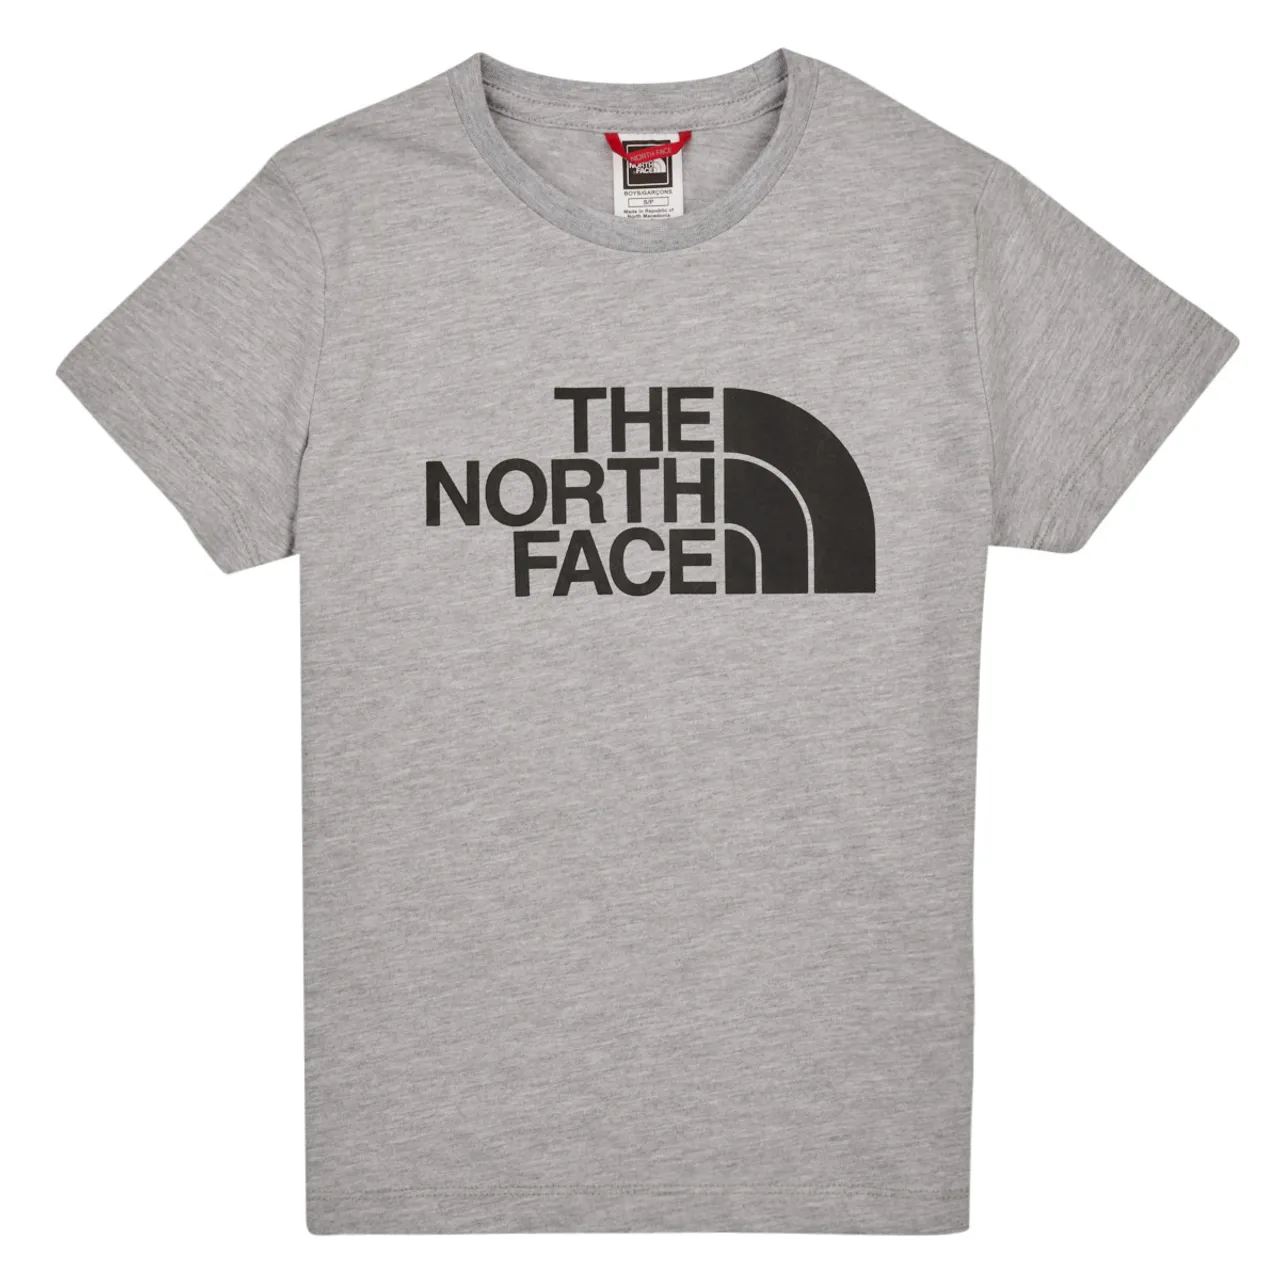 The North Face  Boys S/S Easy Tee  boys's Children's T shirt in Grey